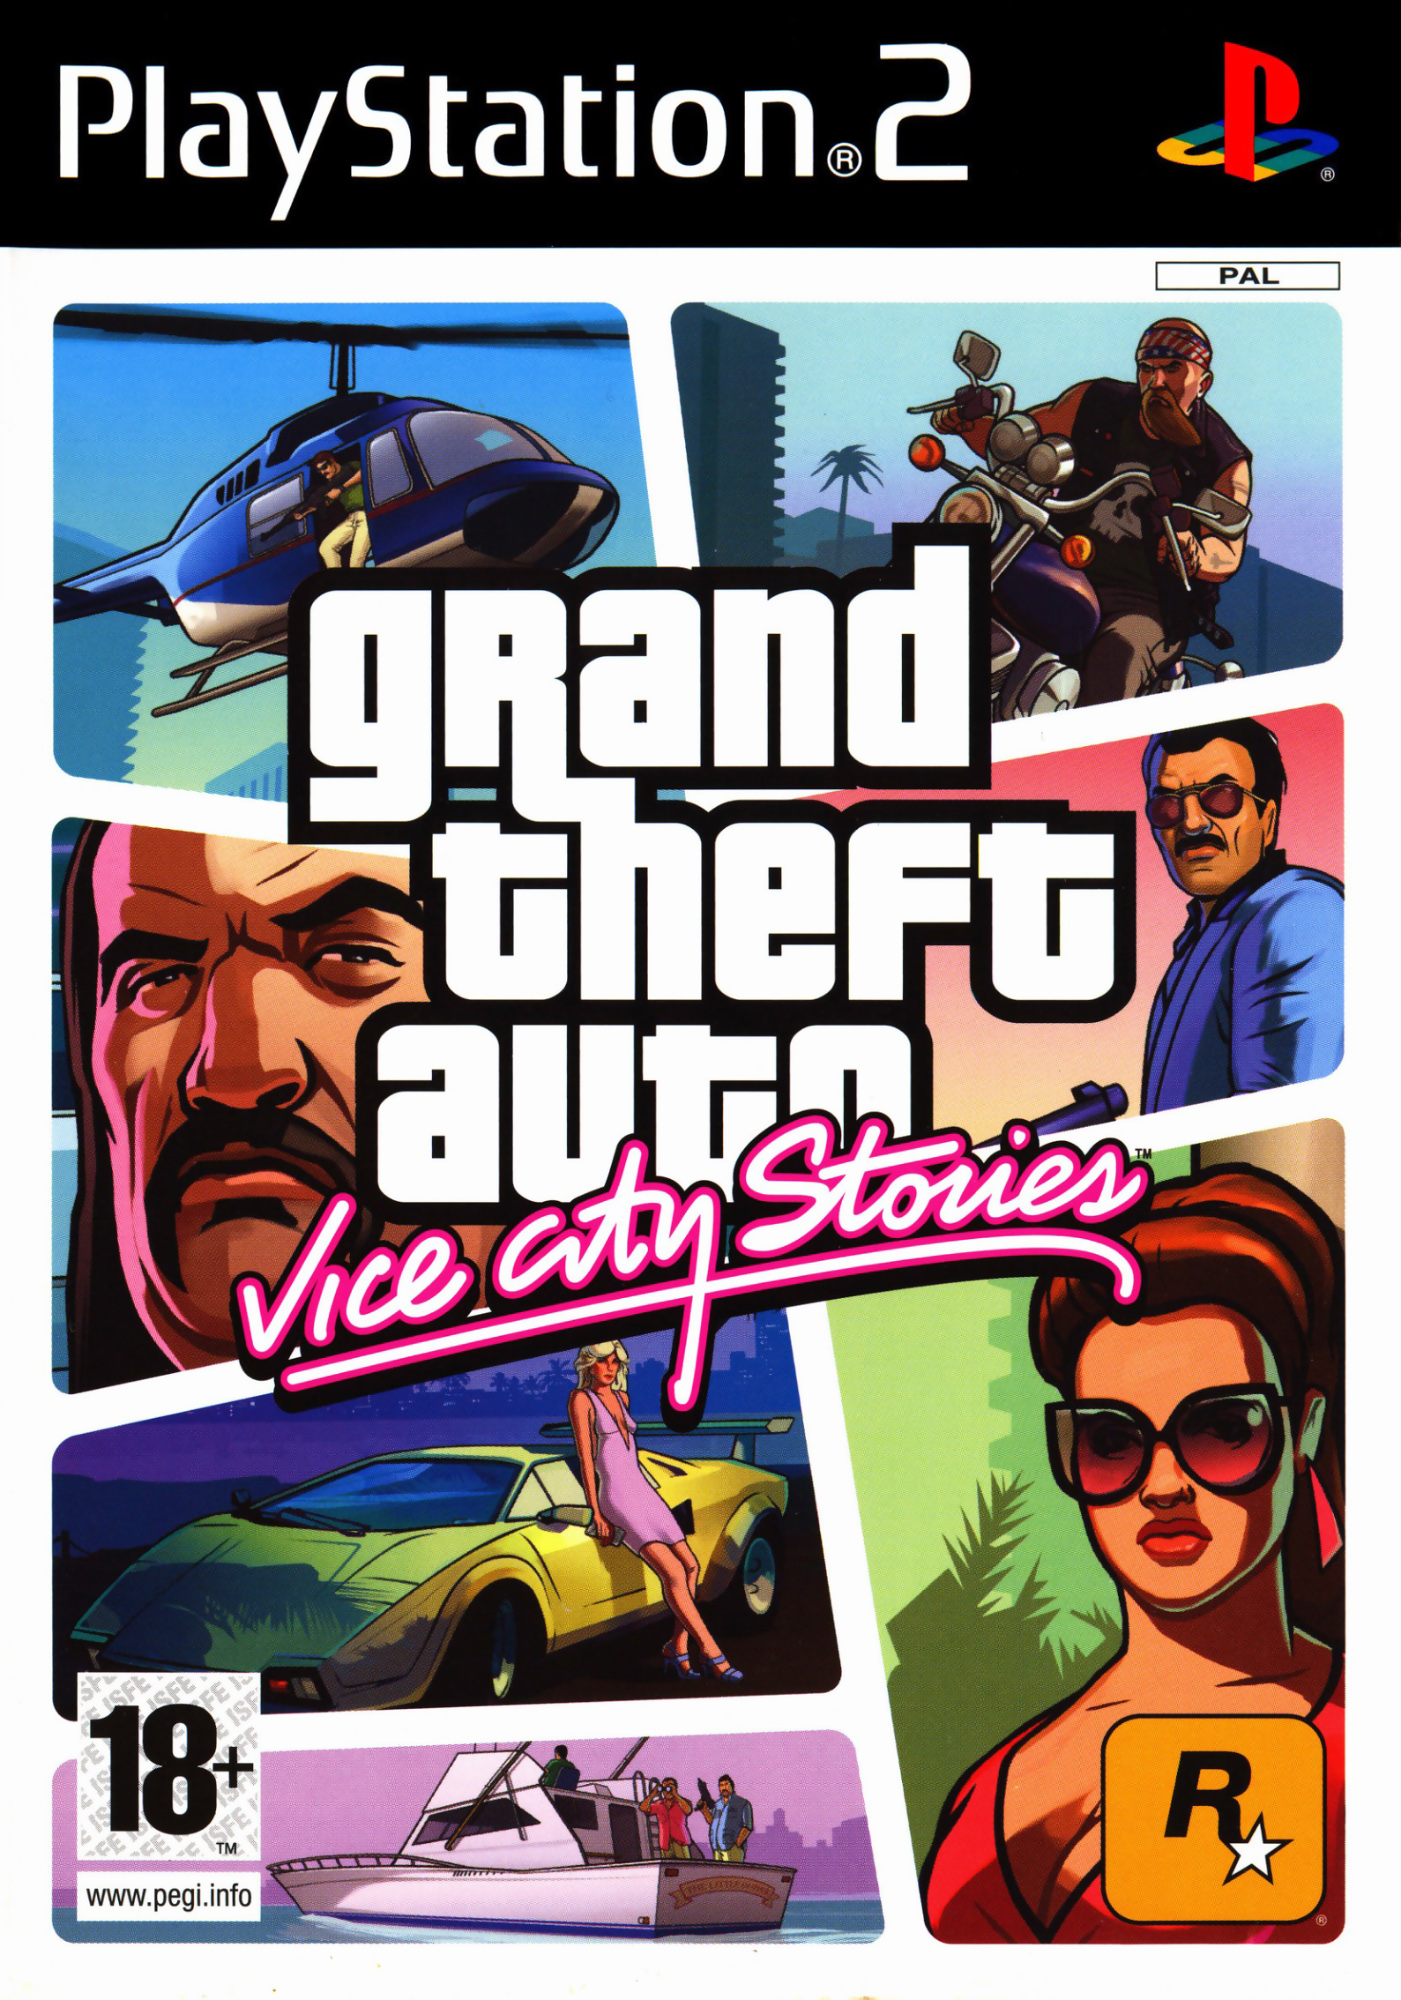 Grand Theft Auto Vice City Stories Details  LaunchBox Games Database